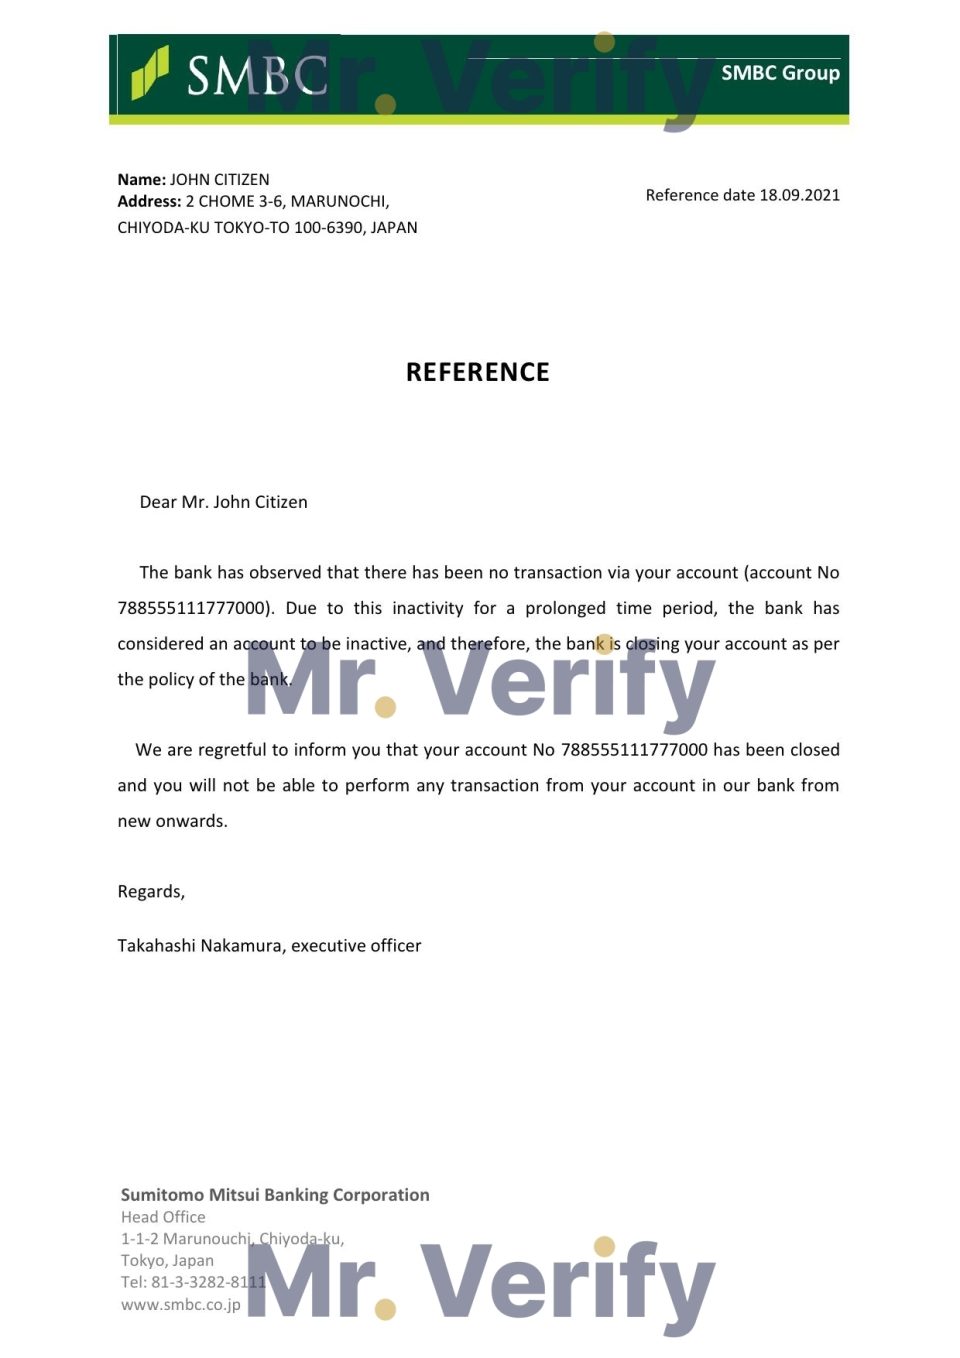 Download Japan SMBC Bank Reference Letter Templates | Editable Word